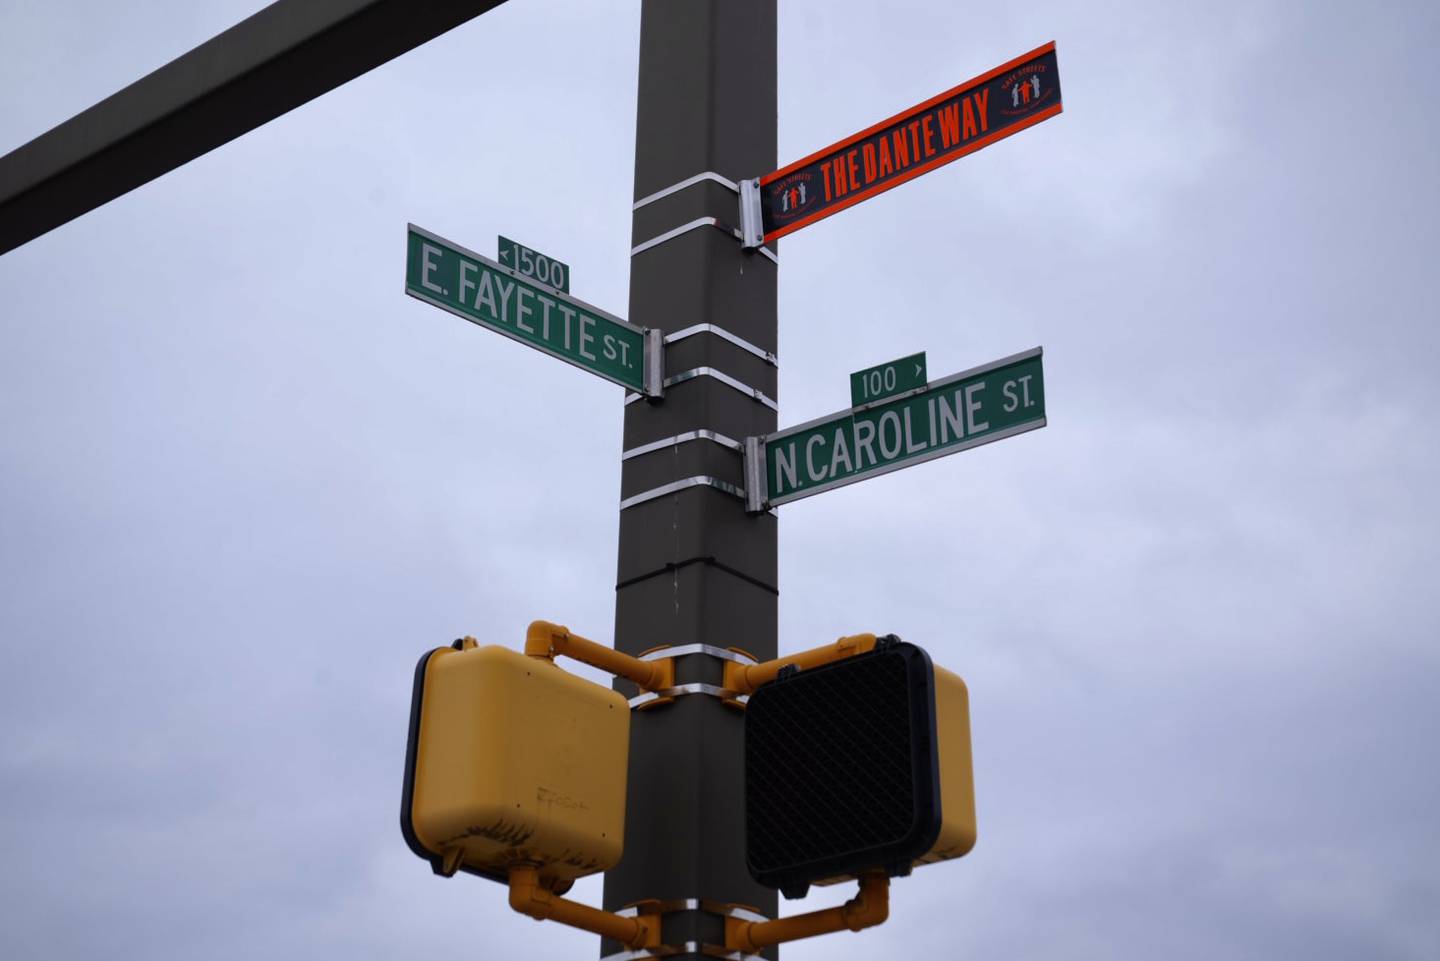 "The Dante Way" at the corner of N. Caroline St and E. Fayette St. named for Dante Barksdale.